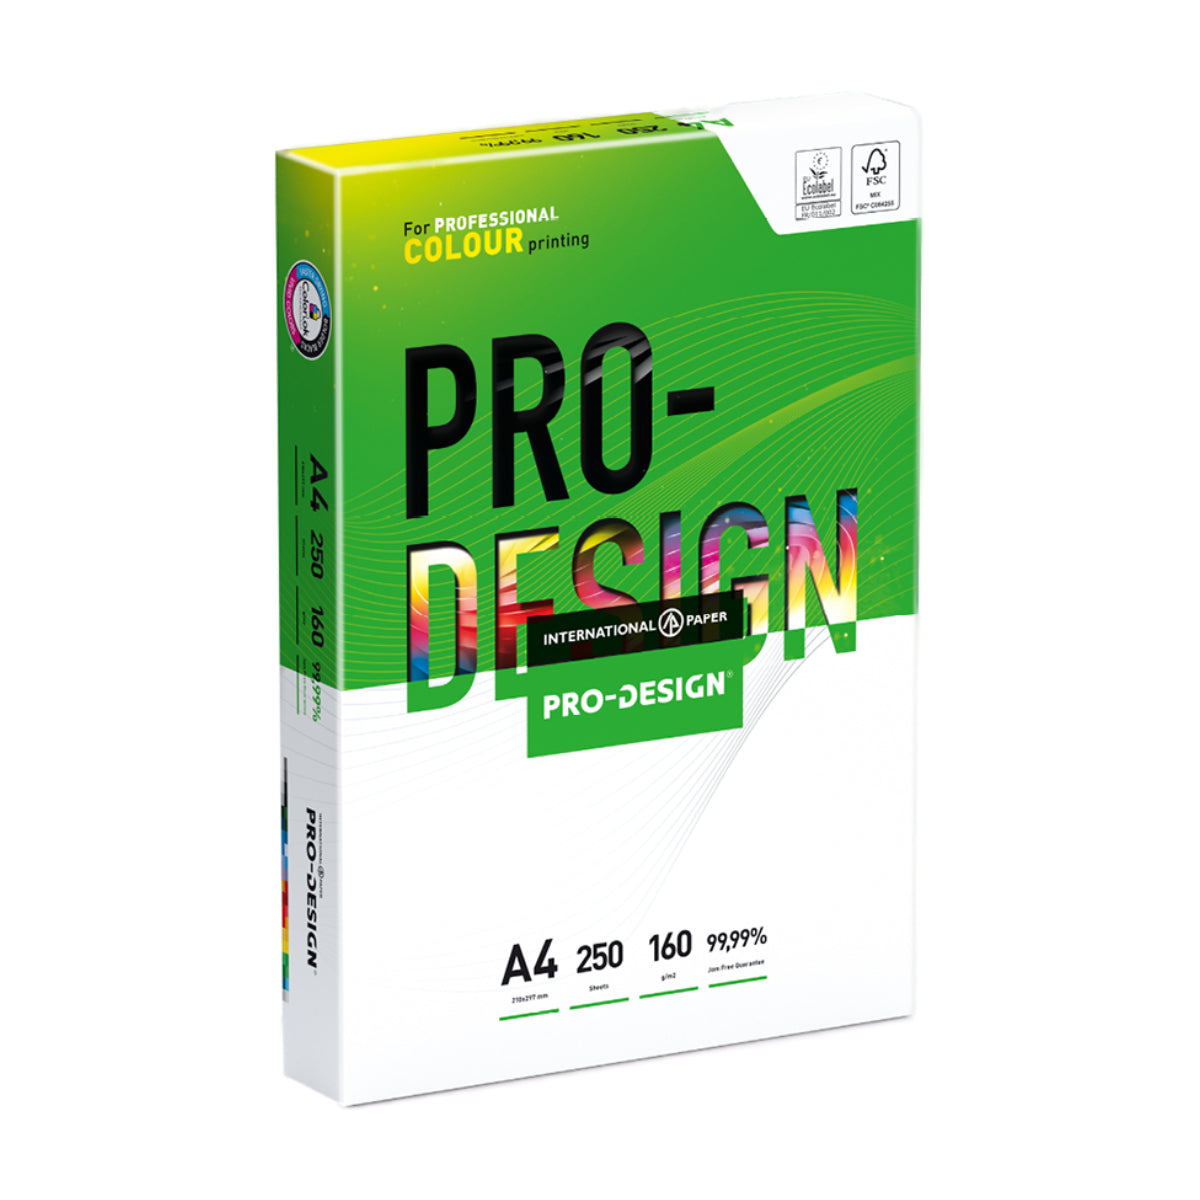 PRO-DESIGN Paper A4, 160gsm, 250sheets/pack, White